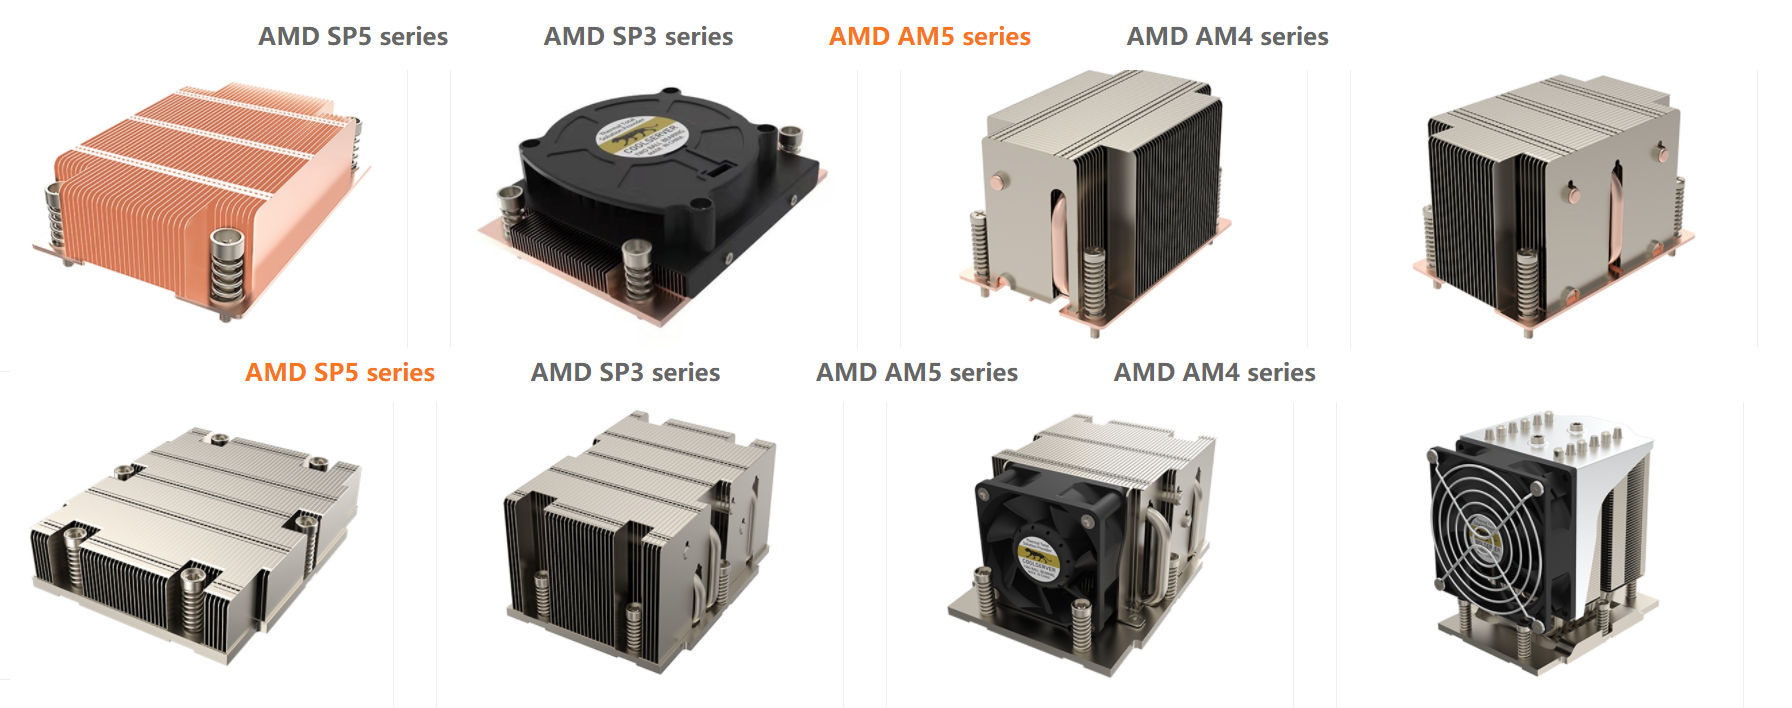 AMD-SP5-and-AM5-coolers.jpg